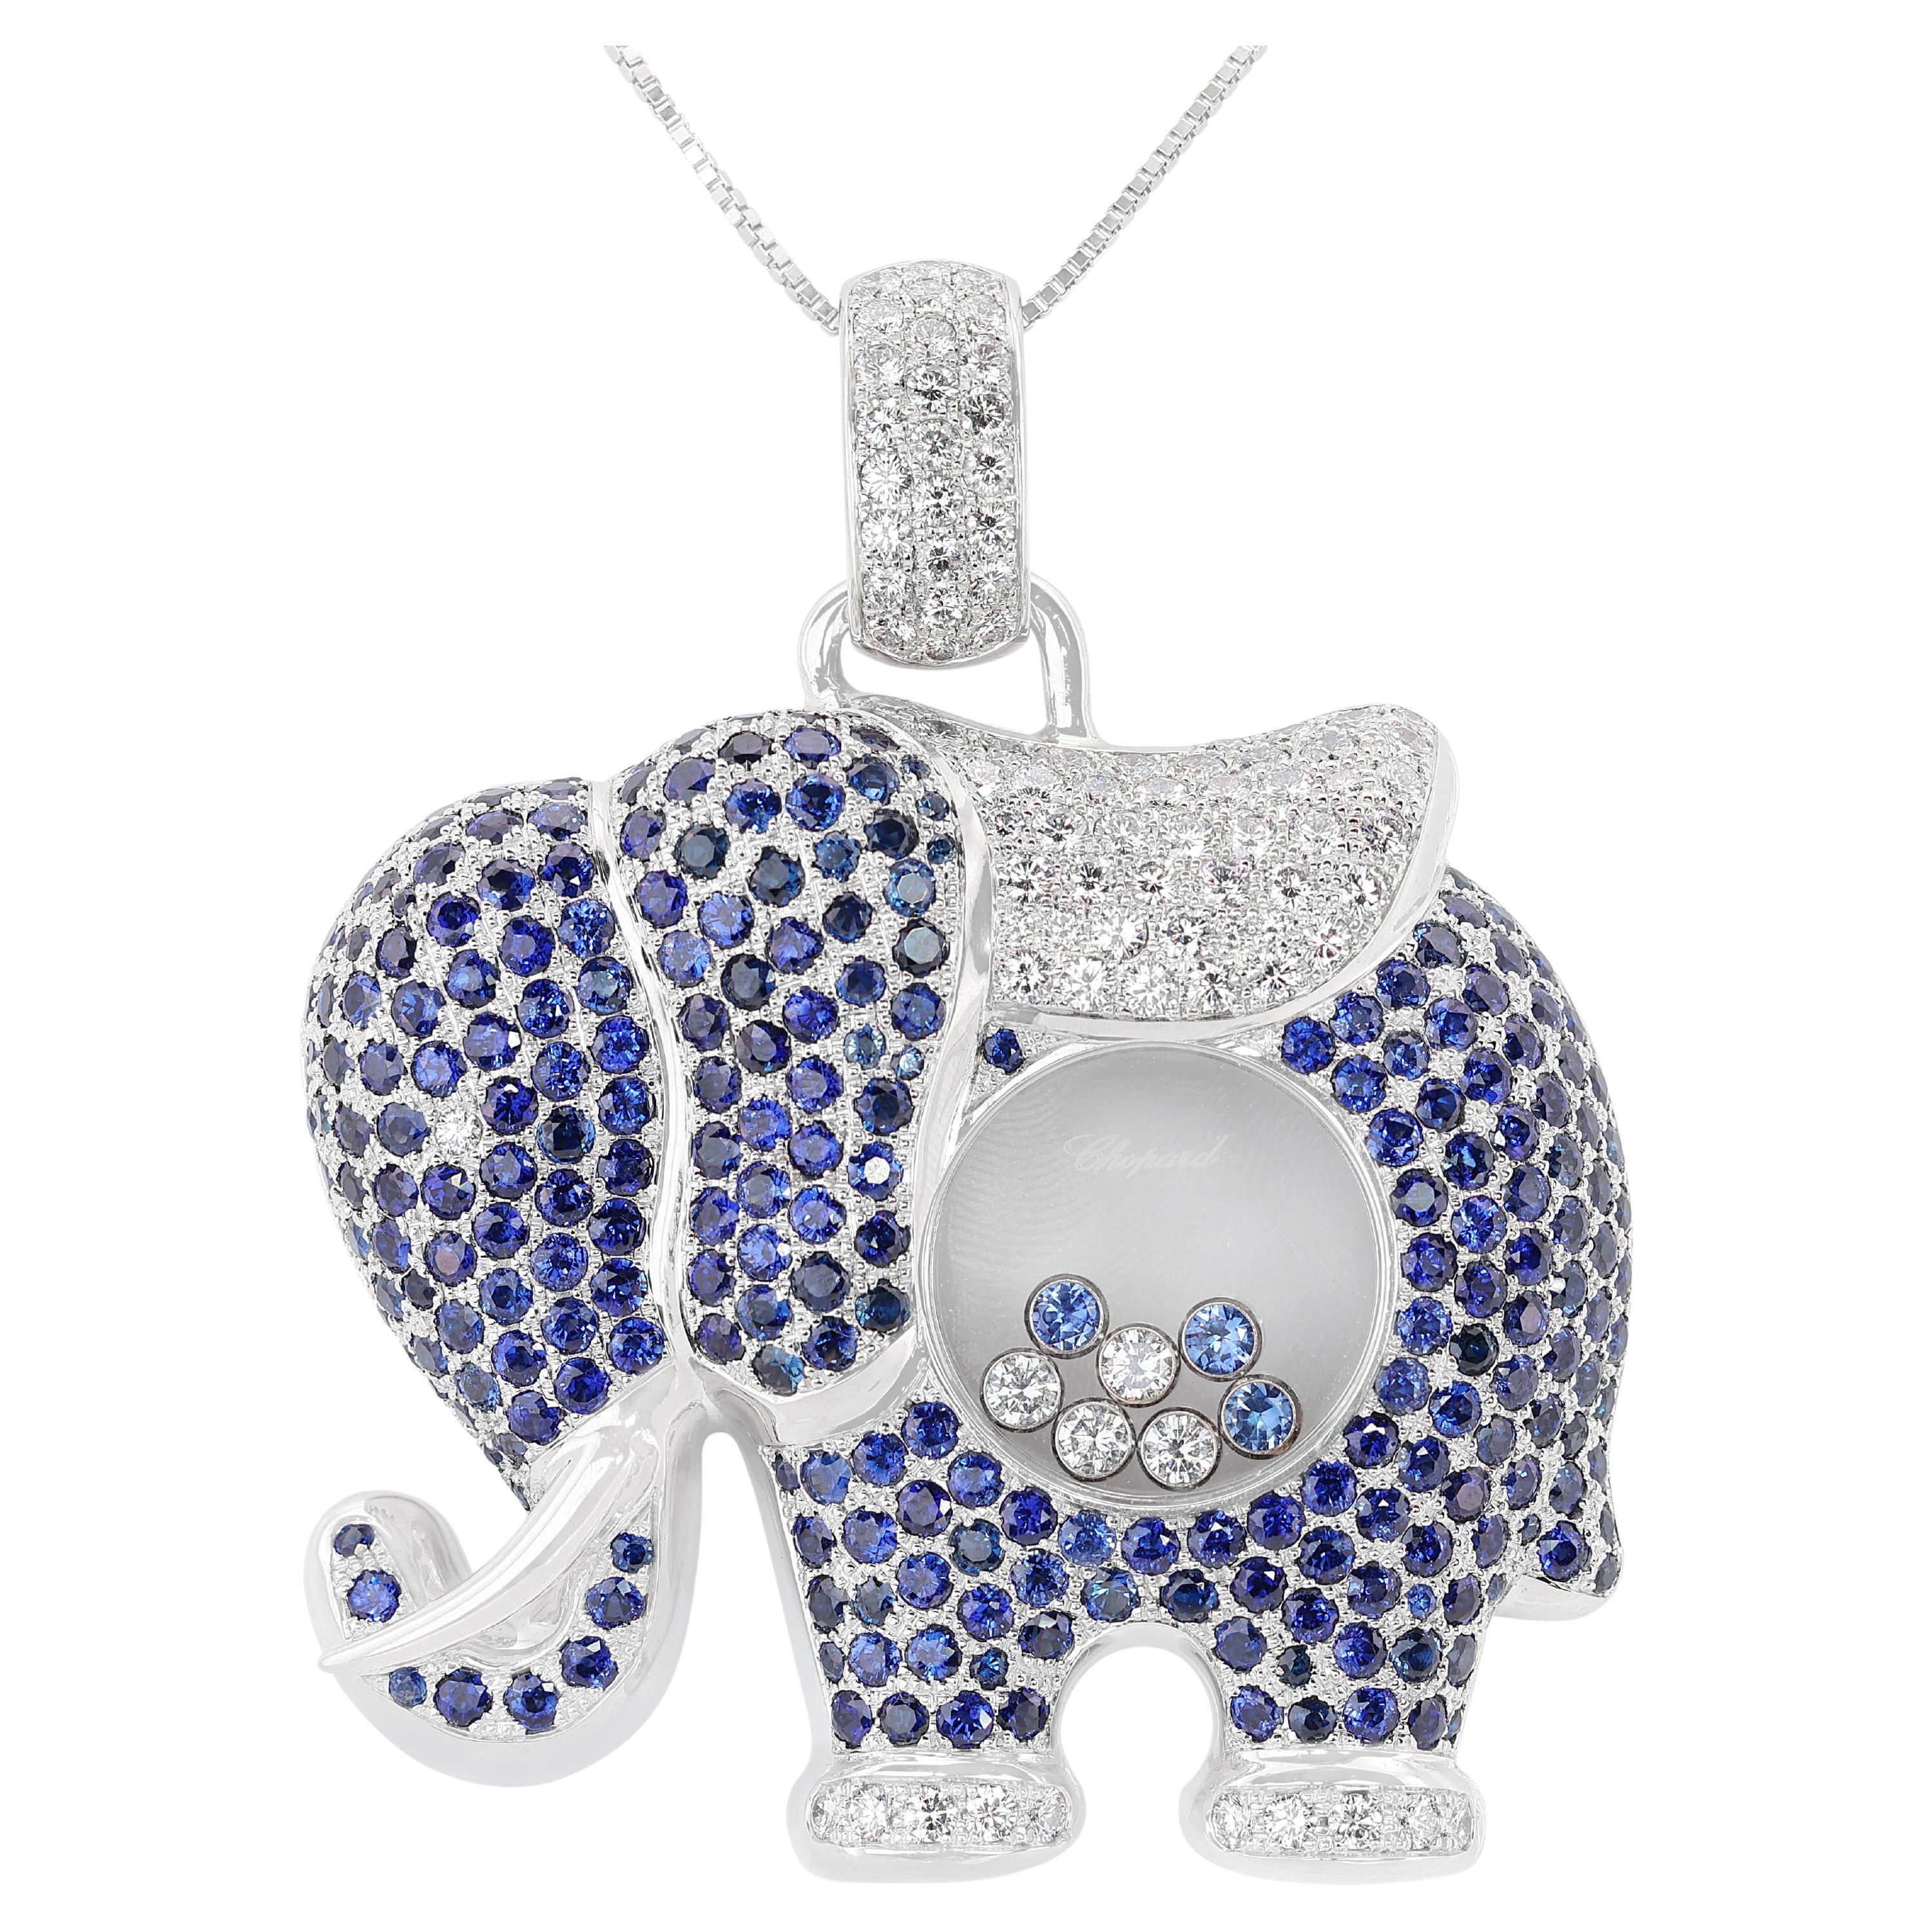 Stunning 7.02ct Sapphire & Diamond Pendant in 18K White Gold(Chain not included) For Sale